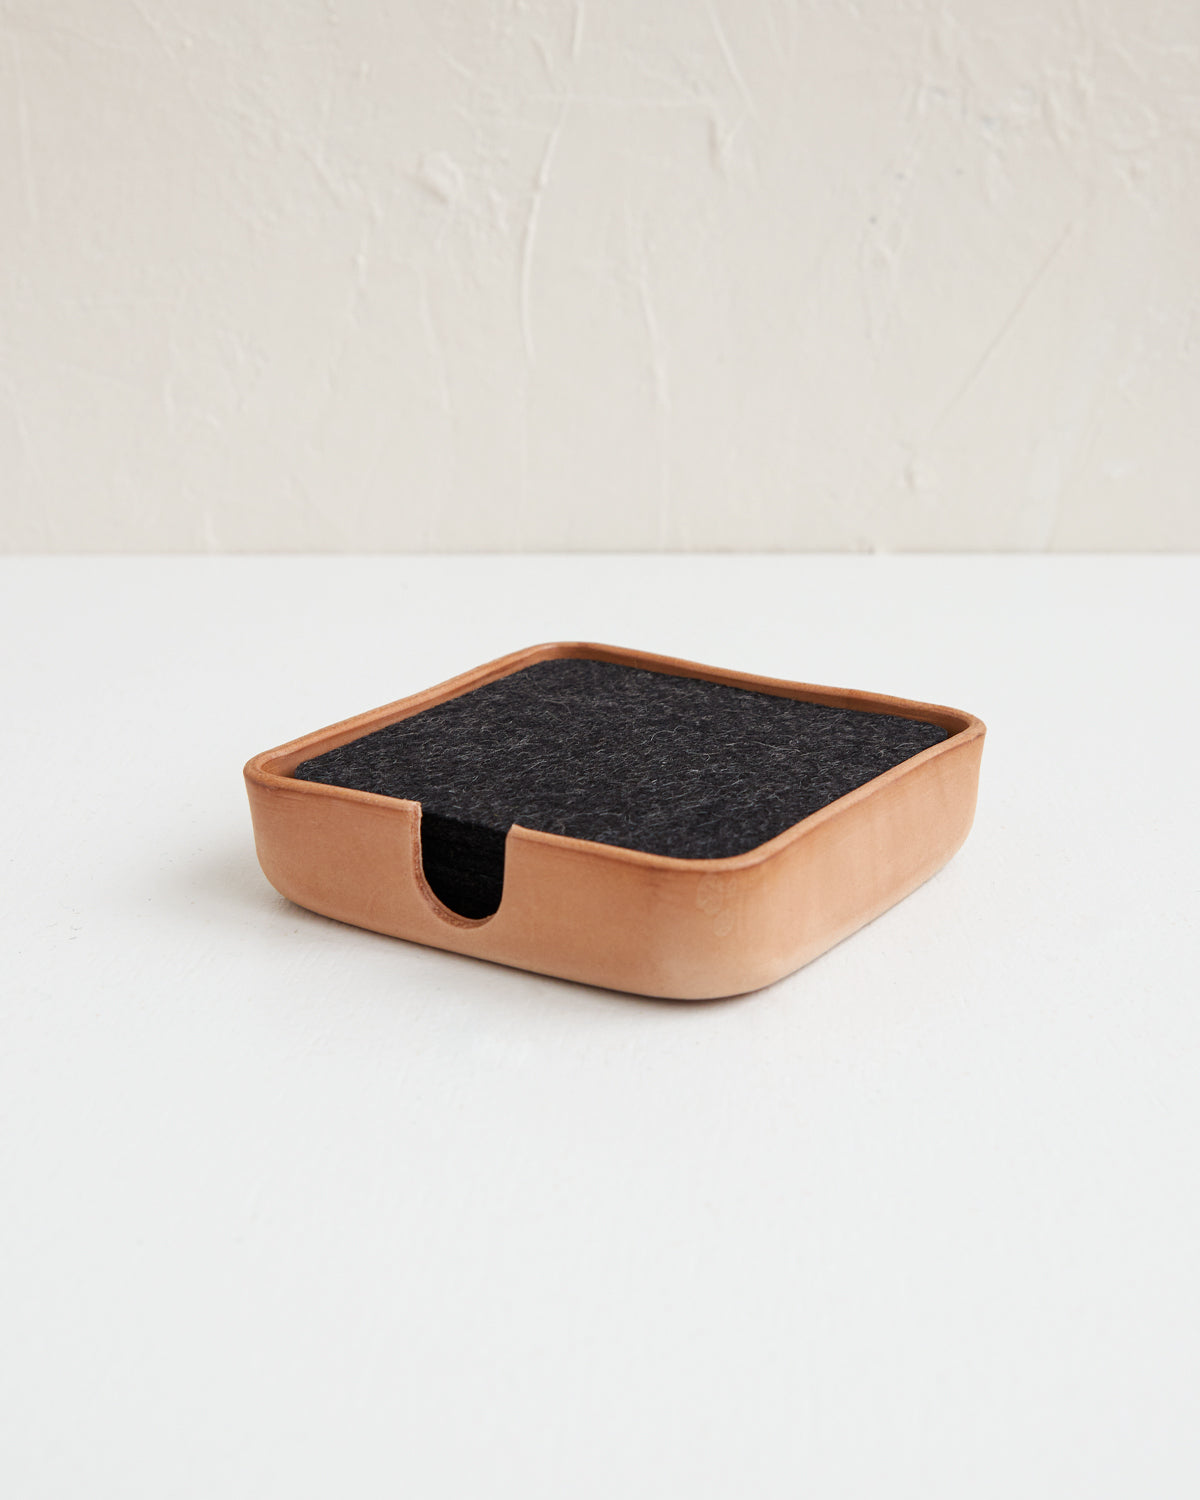 Merino Wool Coasters with Leather Tray